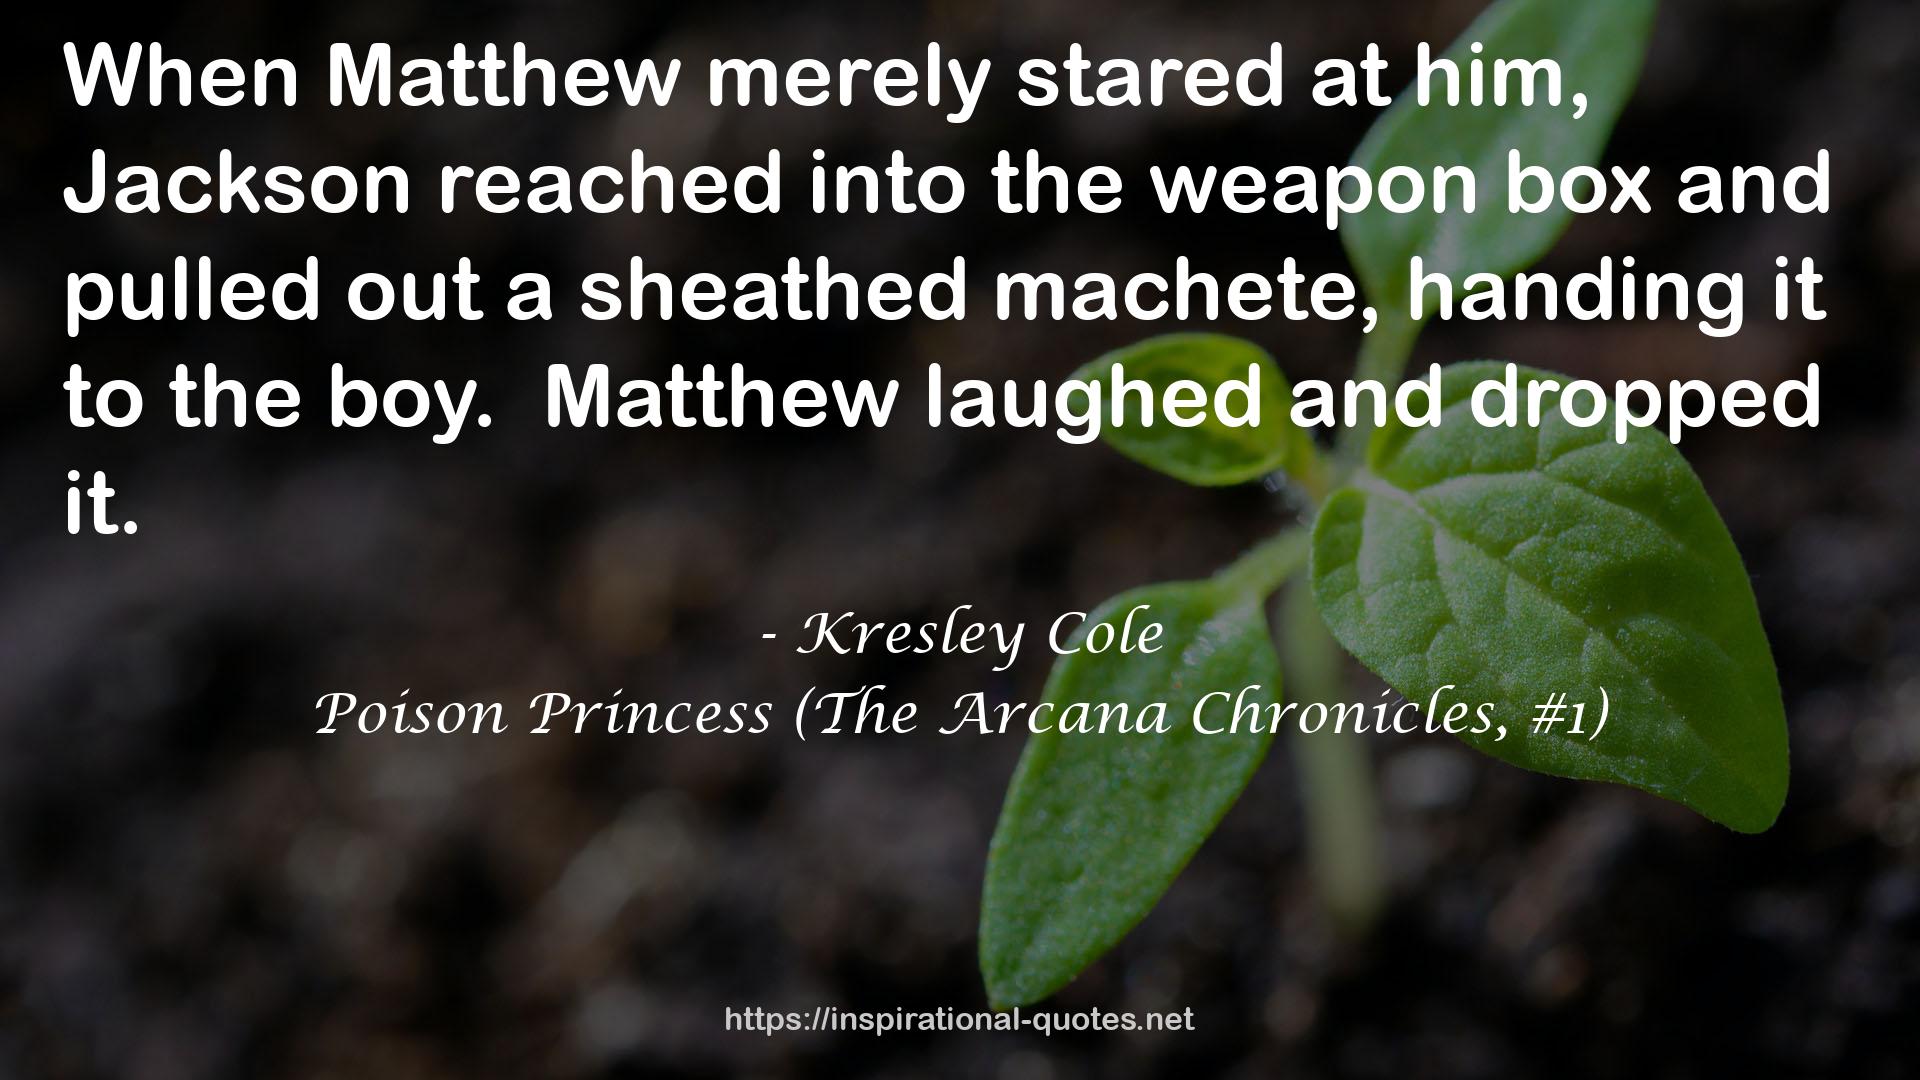 Poison Princess (The Arcana Chronicles, #1) QUOTES